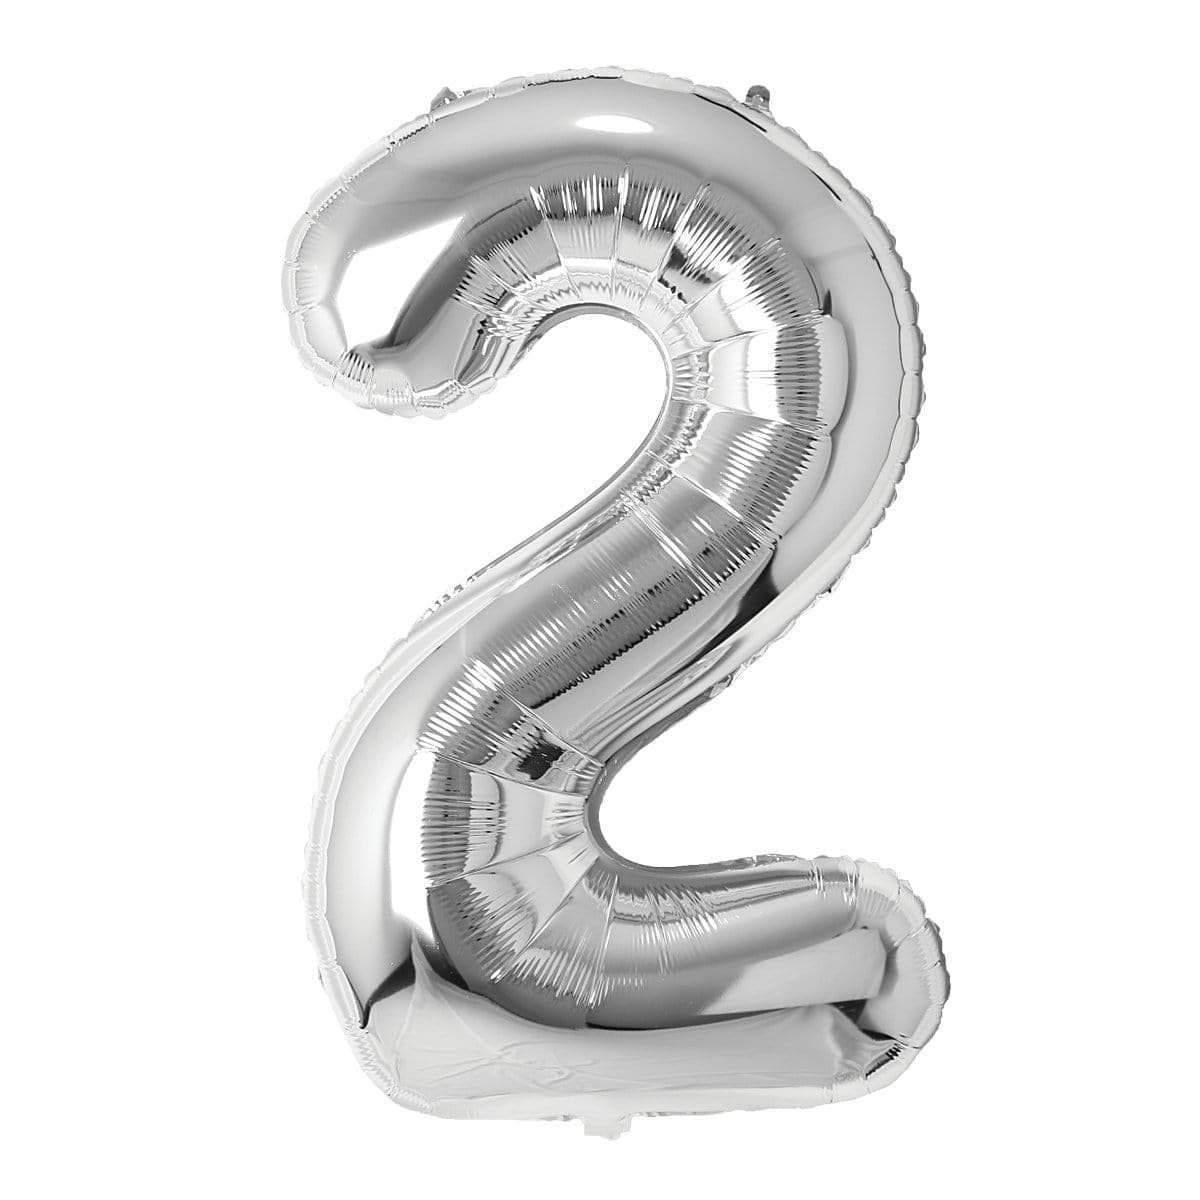 Buy Balloons Silver Number 2 Foil Balloon, 34 Inches sold at Party Expert